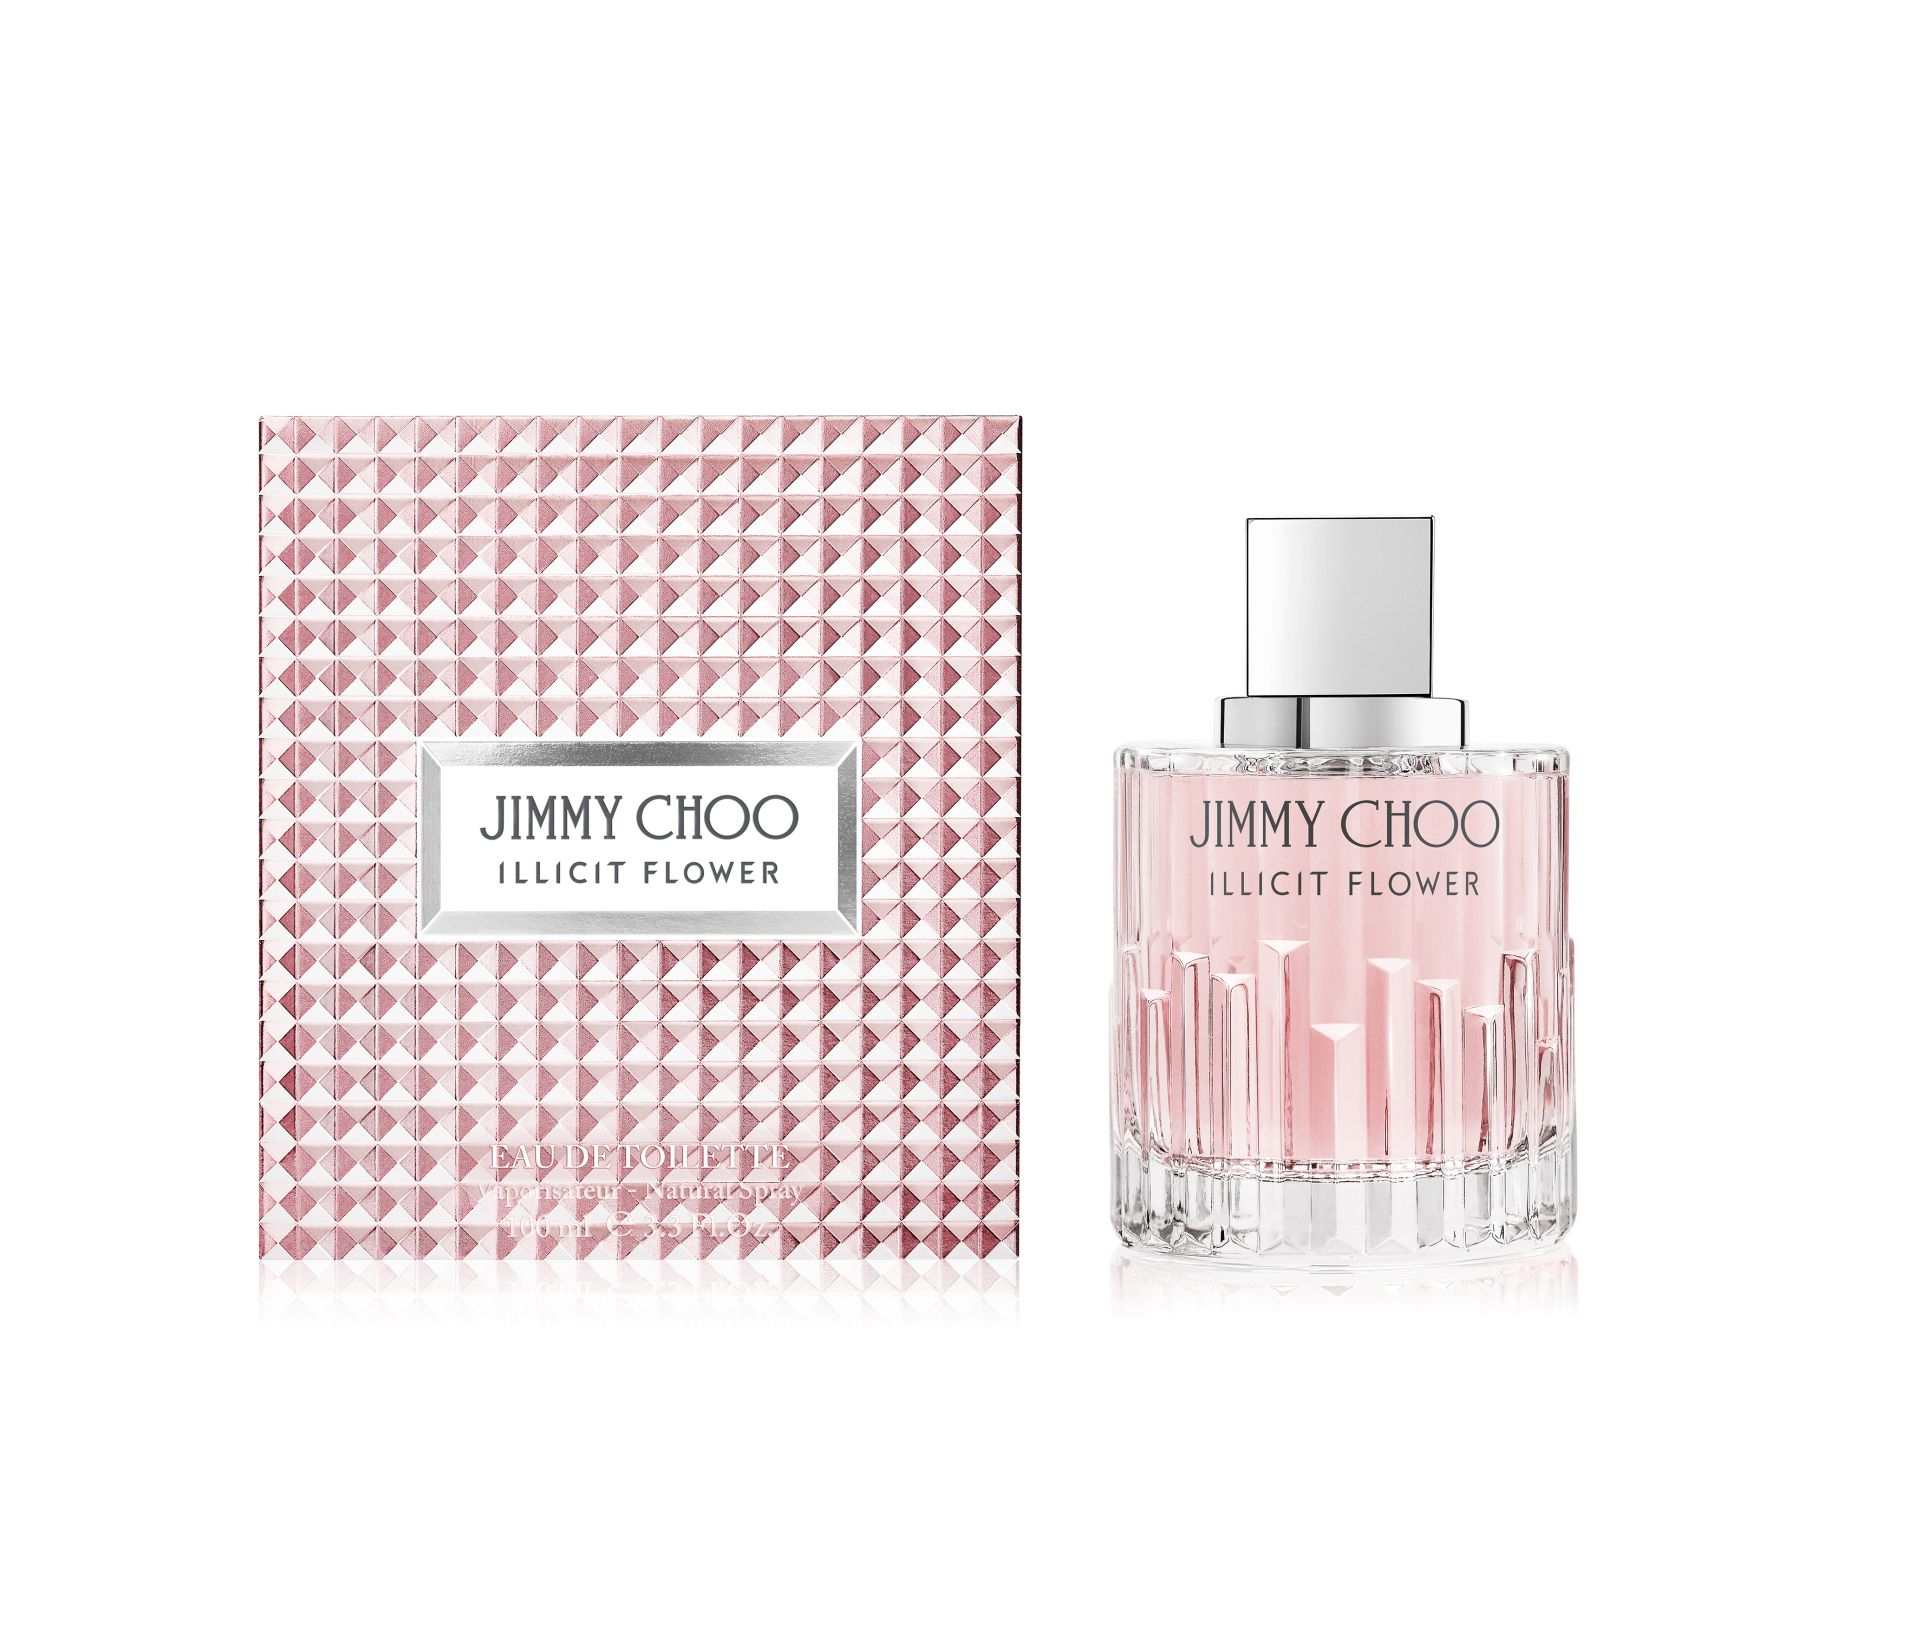 JIMMY CHOO ILLICIT FLOWER_100ml_FRONT VIEW